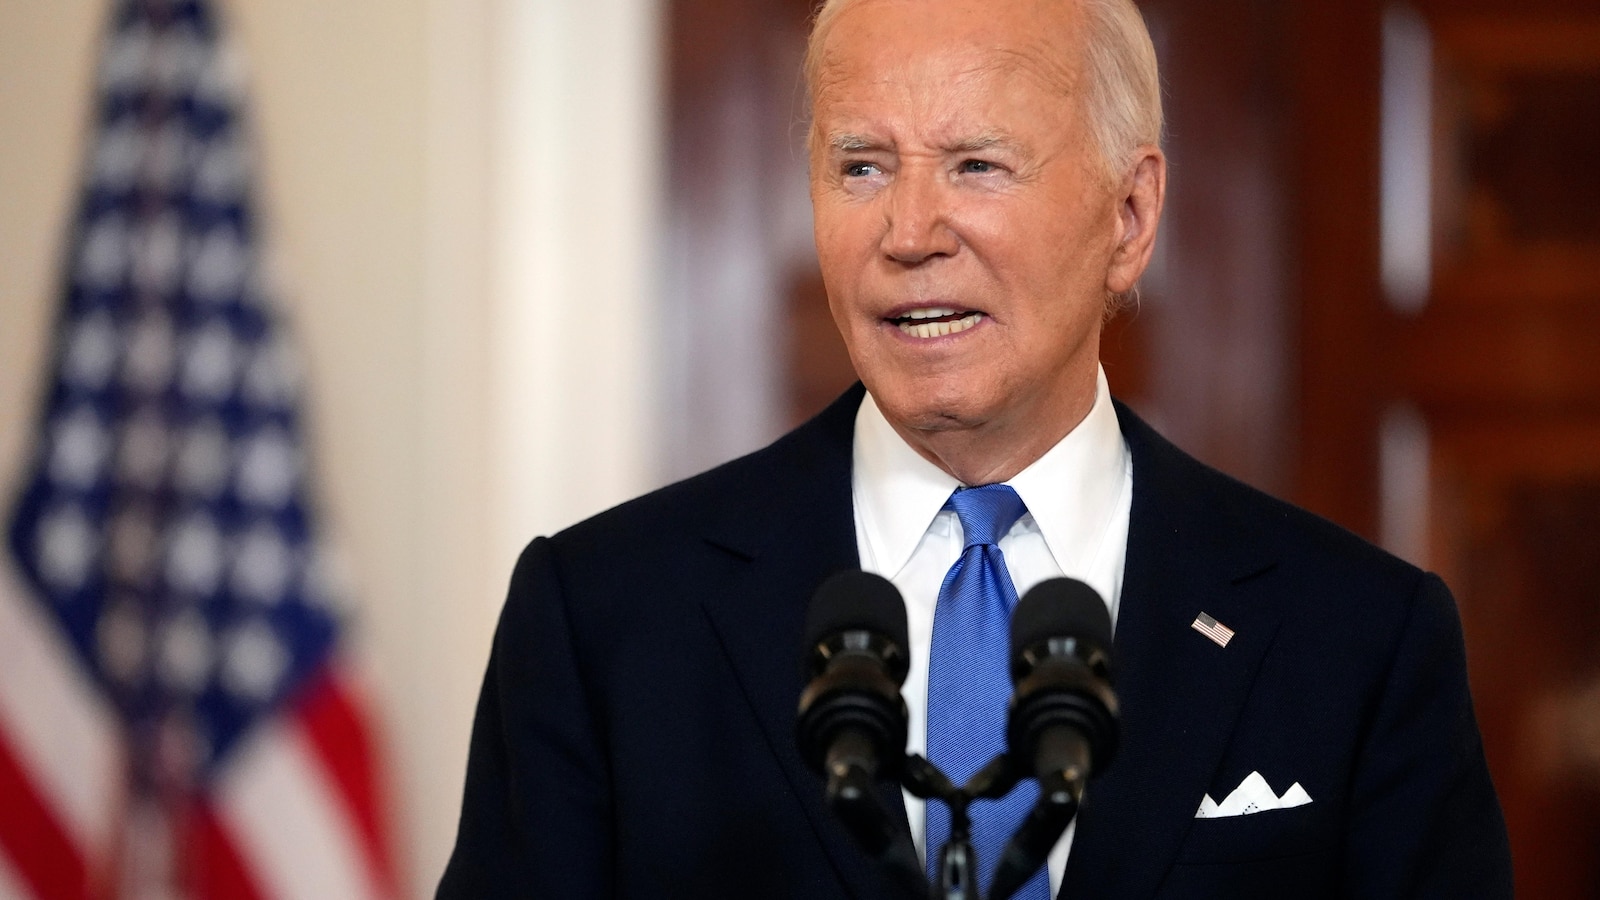 Biden and the Democratic Party raise $264 million in fundraising efforts during the 2nd quarter